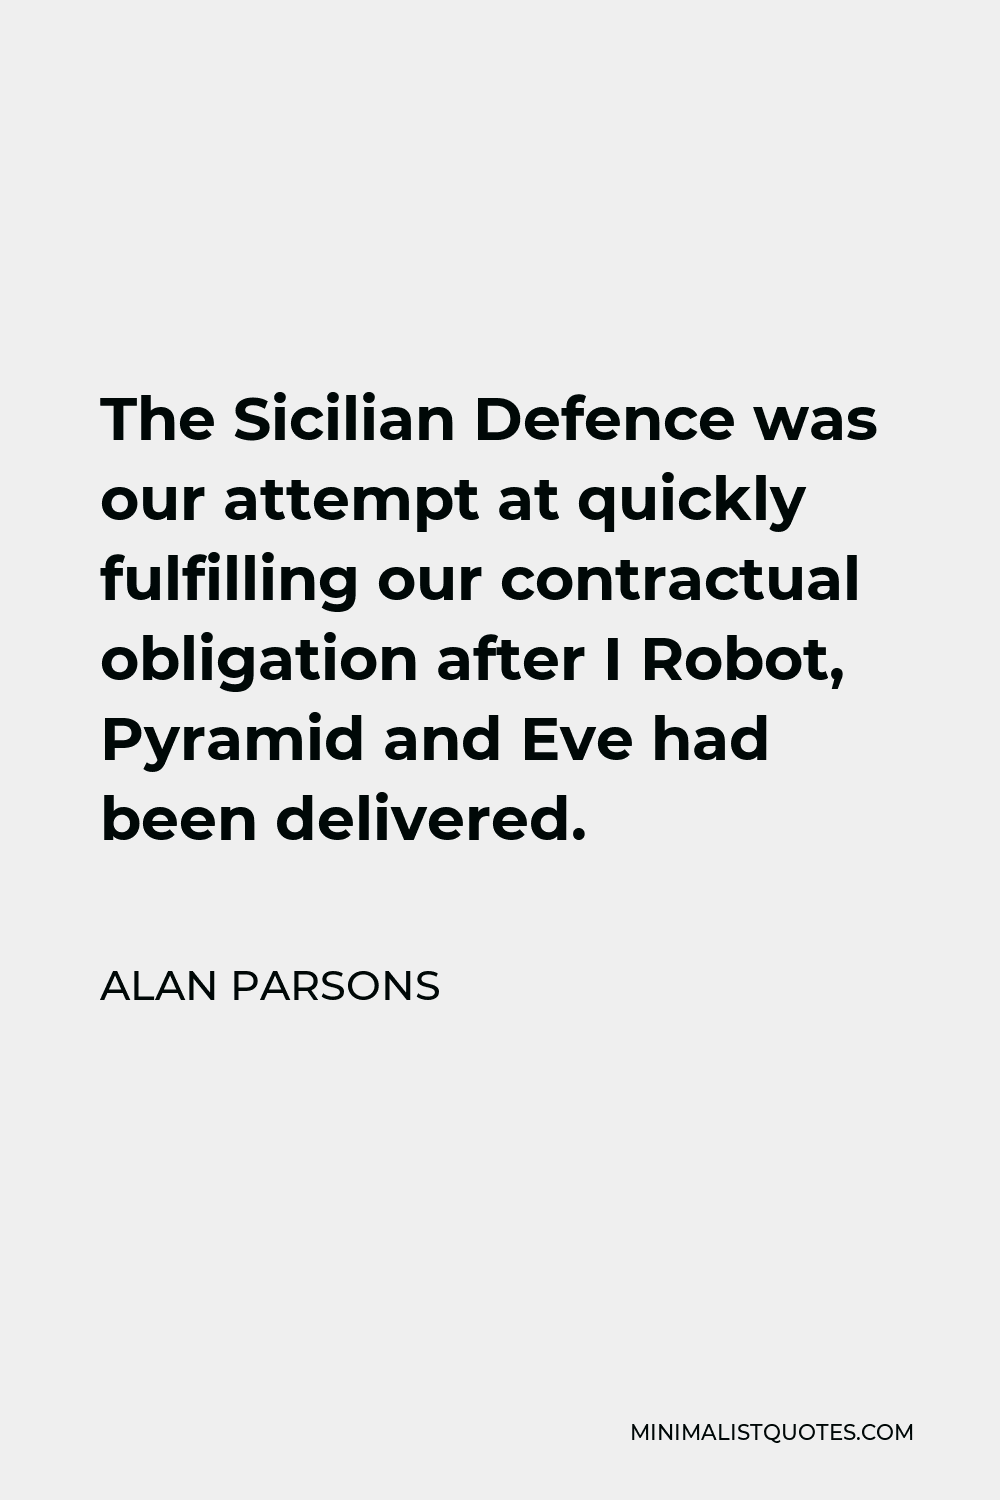 Alan Parsons Quote - The Sicilian Defence was our attempt at quickly fulfilling our contractual obligation after I Robot, Pyramid and Eve had been delivered.